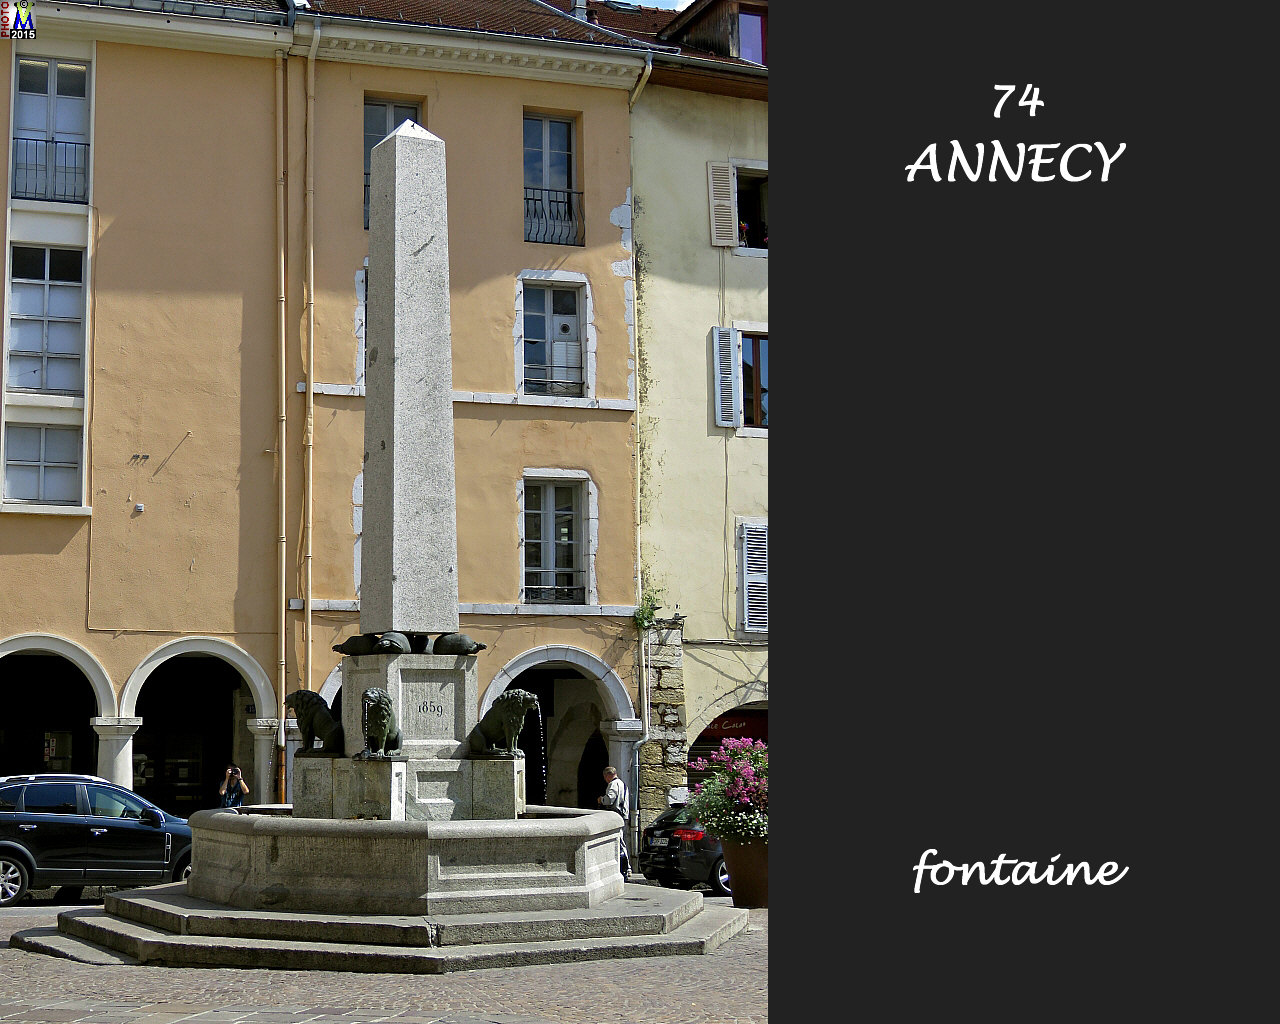 74ANNECY_fontaine_100.jpg